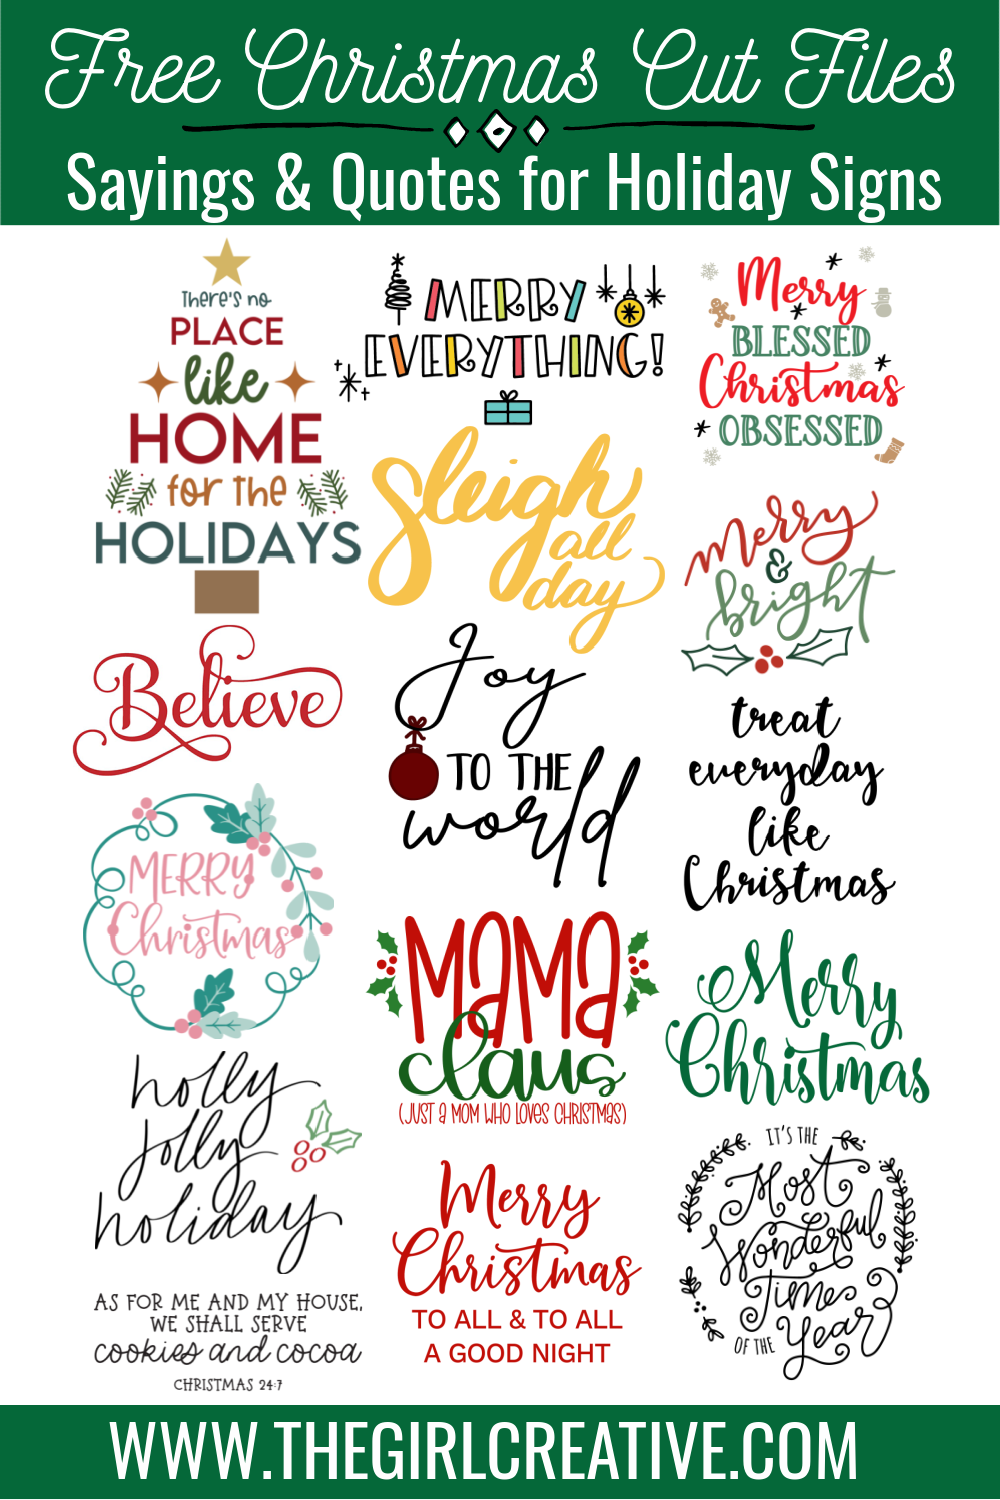 Christmas Quotes and Sayings for Signs + FREE SVG The Girl Creative